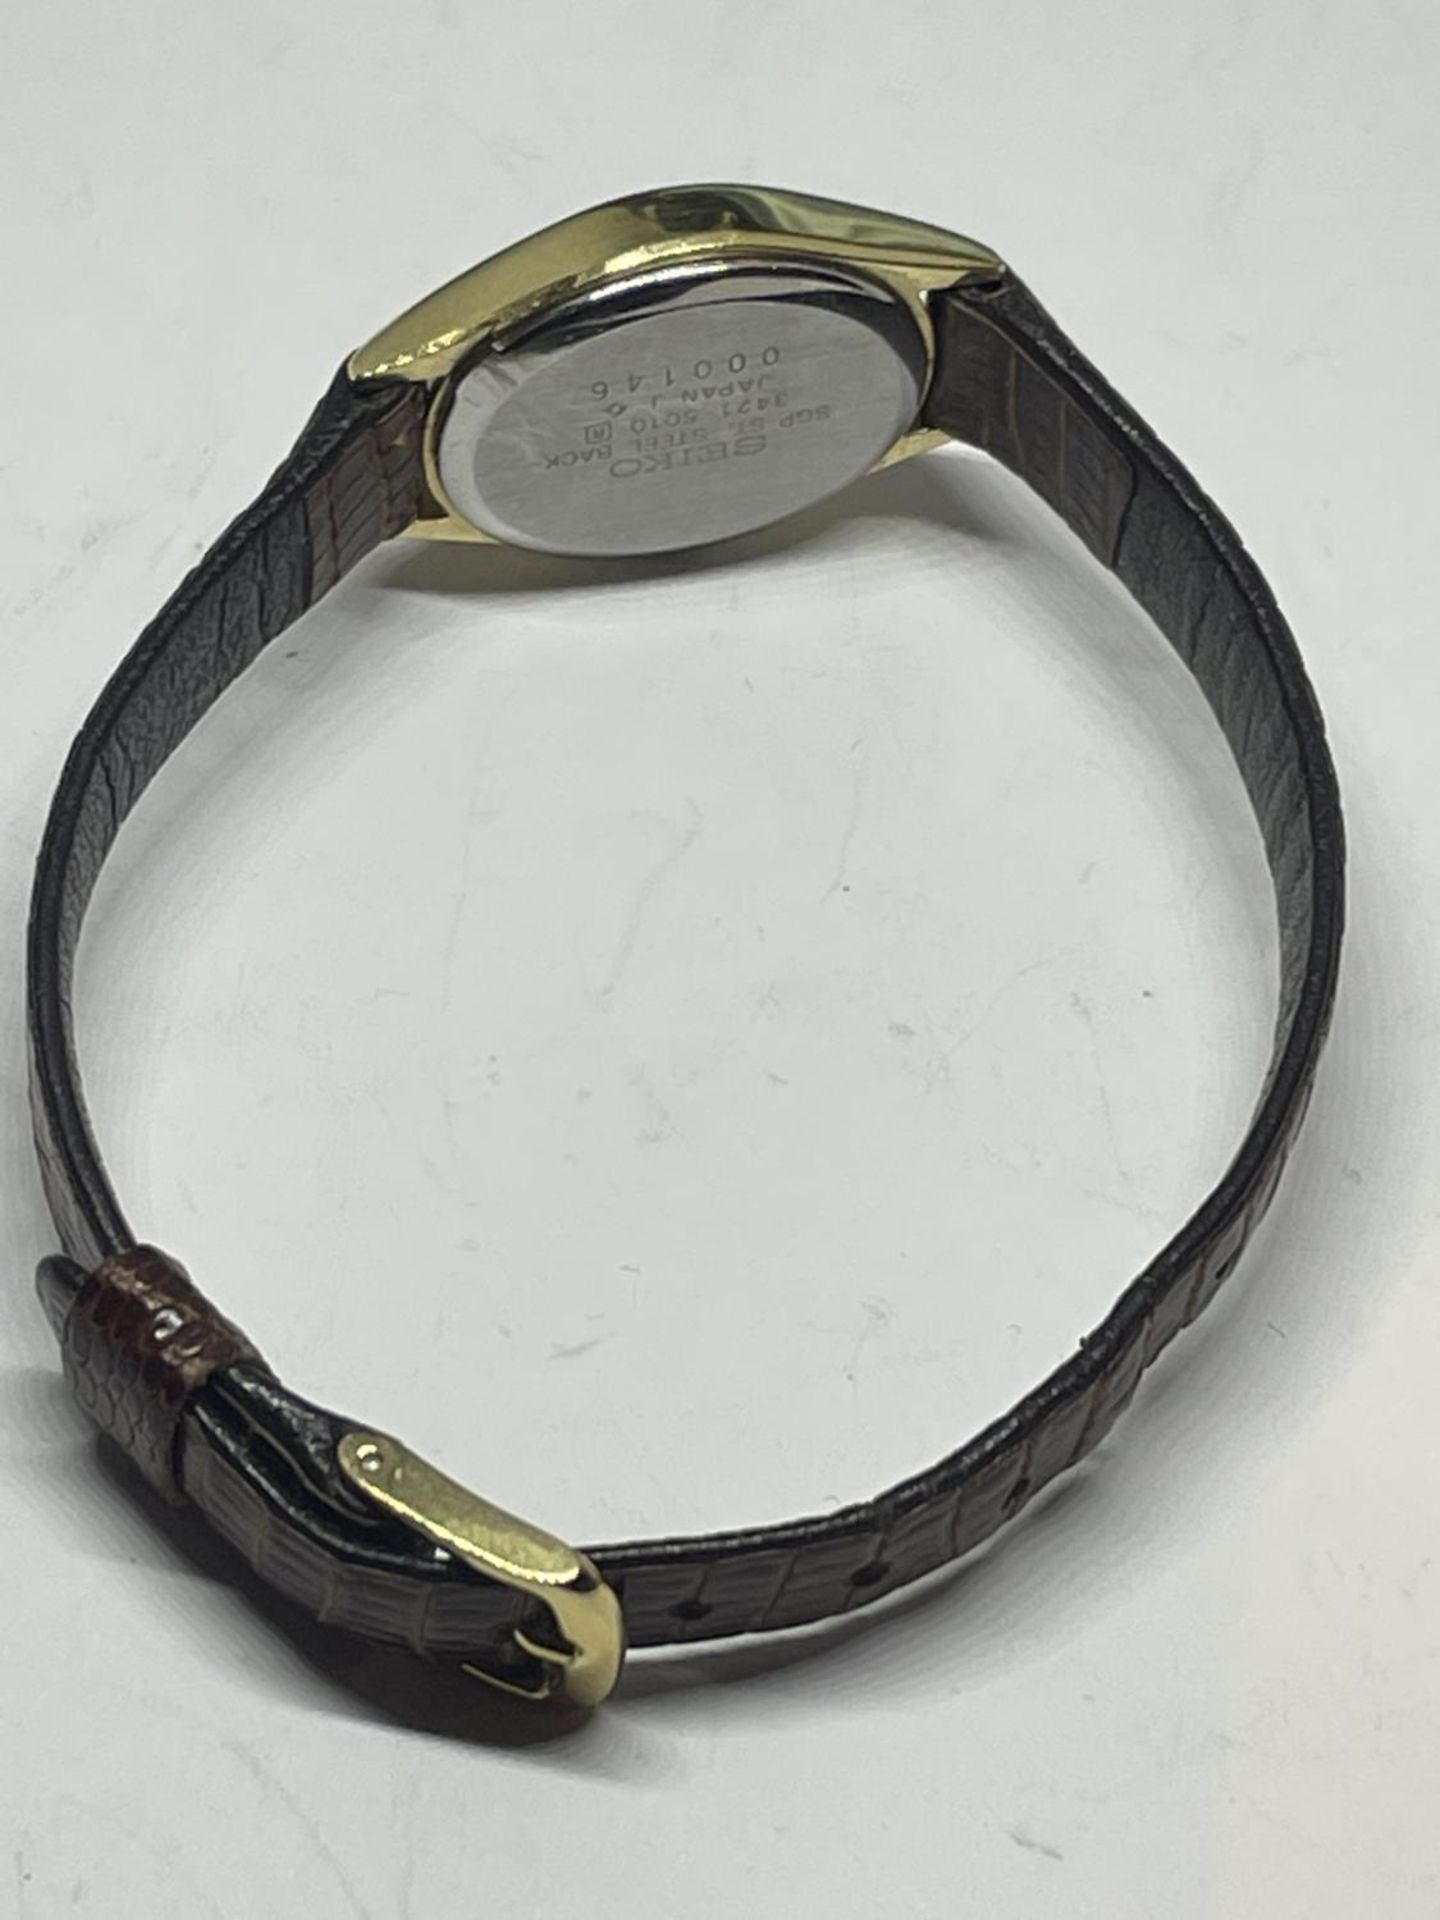 A SEIKO WRIST WATCH WITH A LEATHER STRAP IN A PRESENTATION BOX SEEN WORKING BUT NO WARRANTY - Image 3 of 4